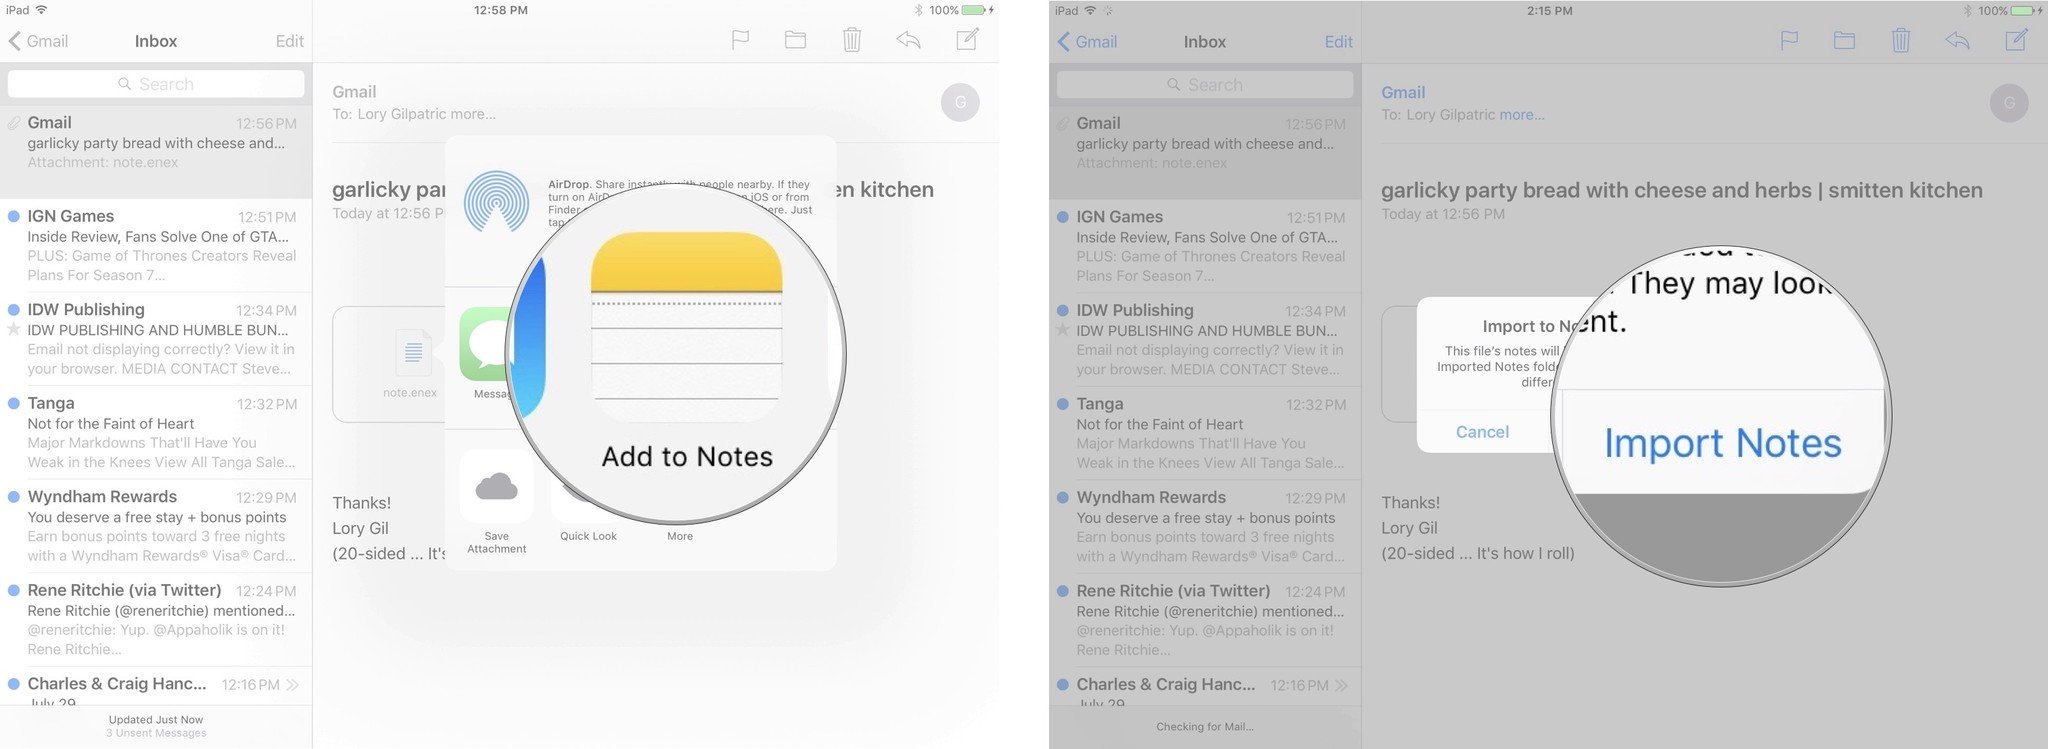 Importing files to Notes in Mail on iPad